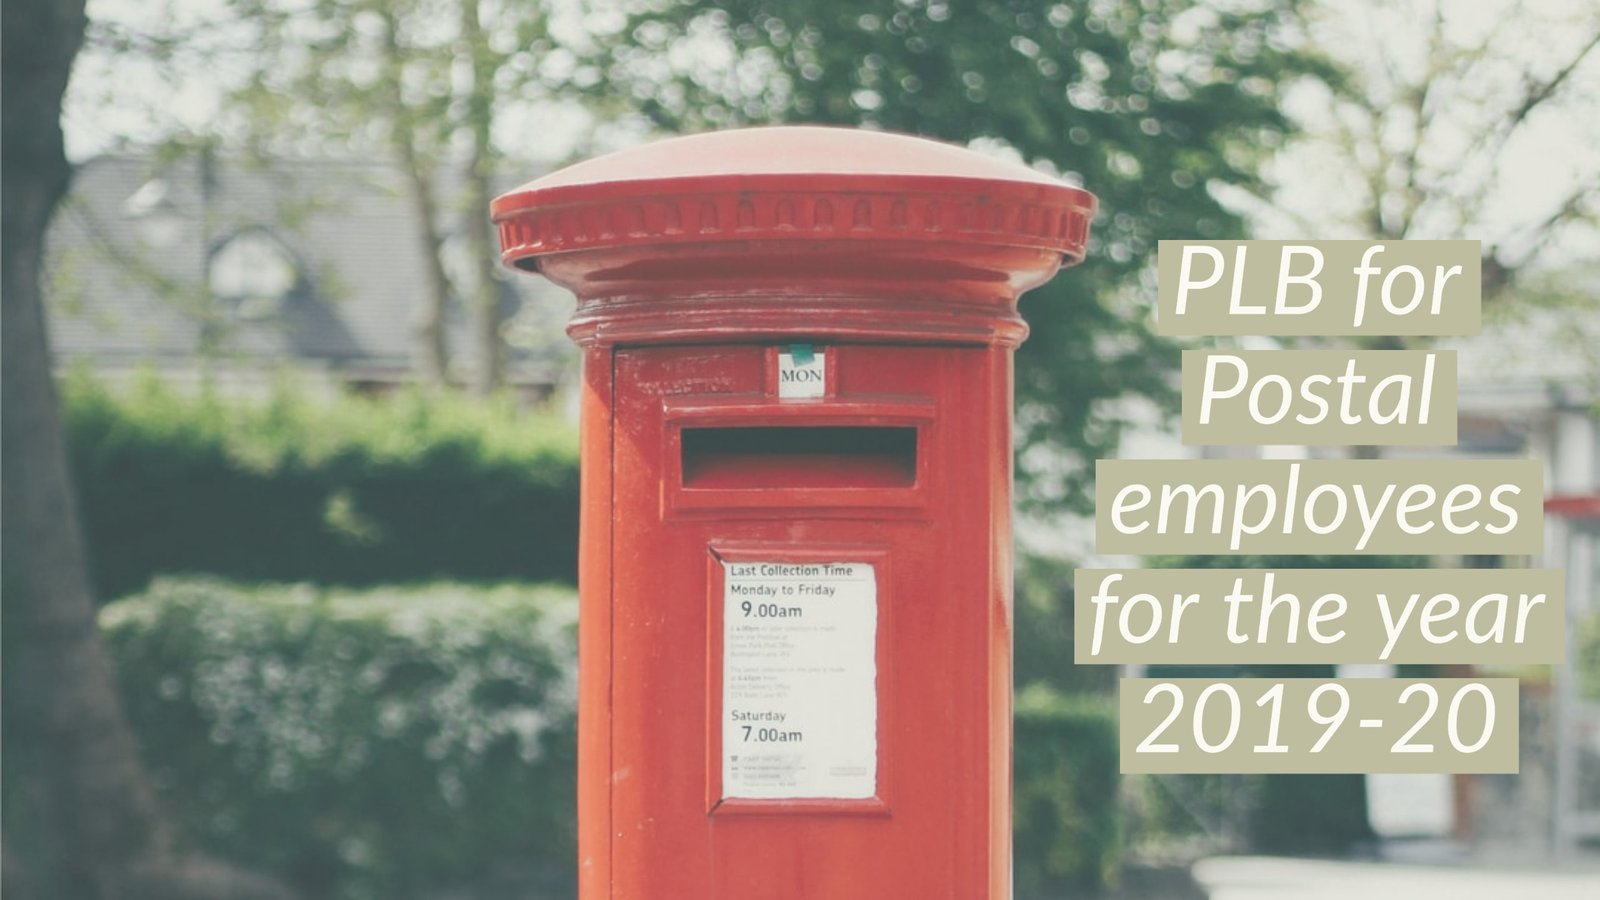 PLB for Postal employees for the year 2019-20